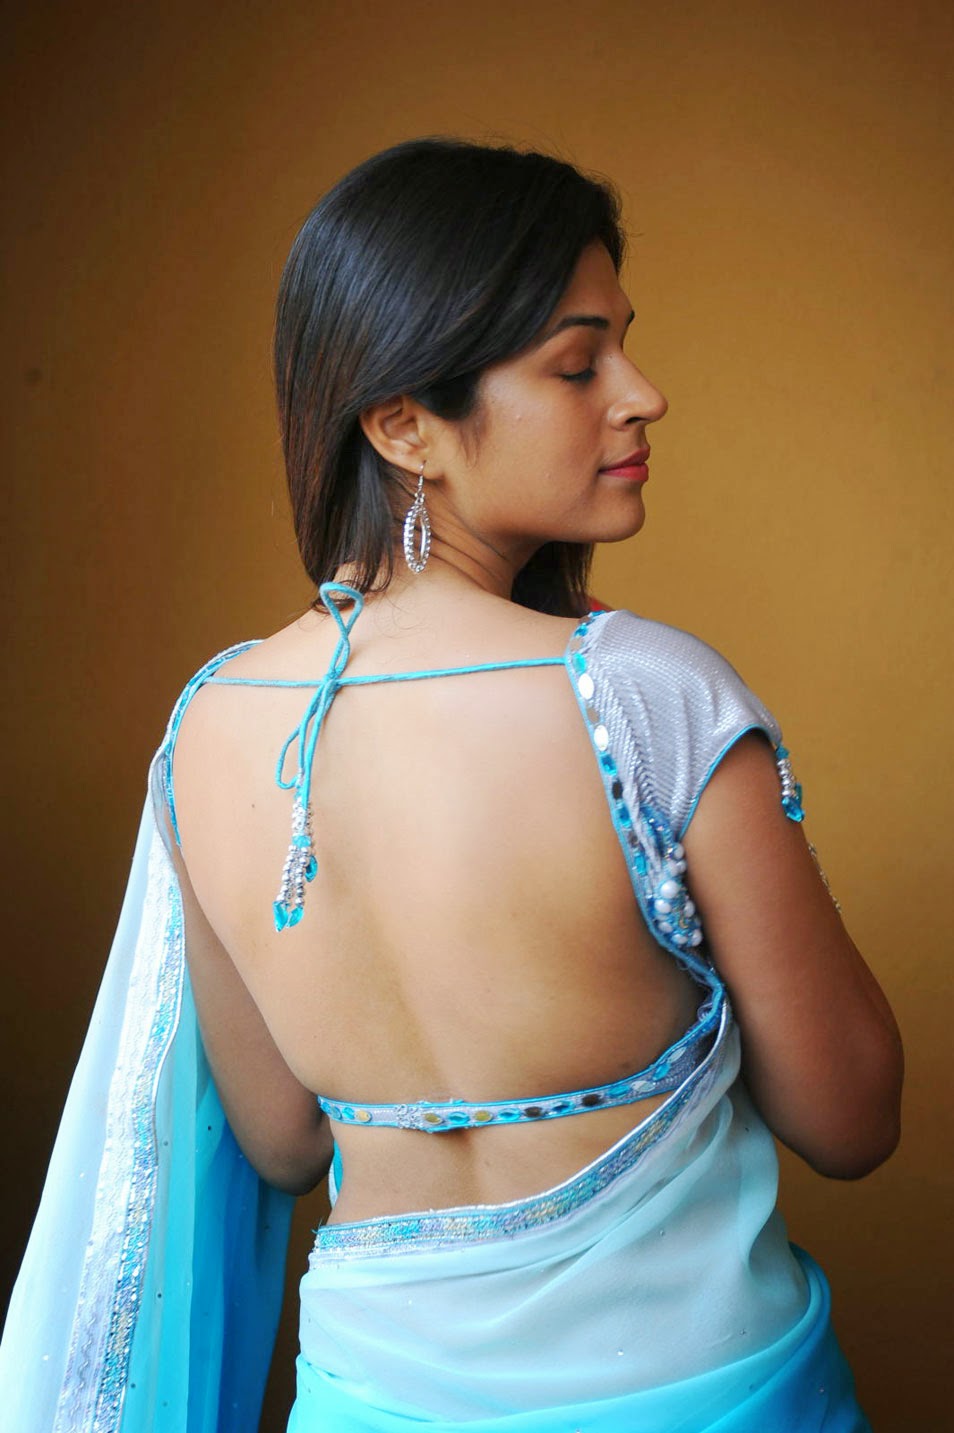 Telugu Movie Actress Shraddha Das in Bare Back Backless in Saree and Blouse...